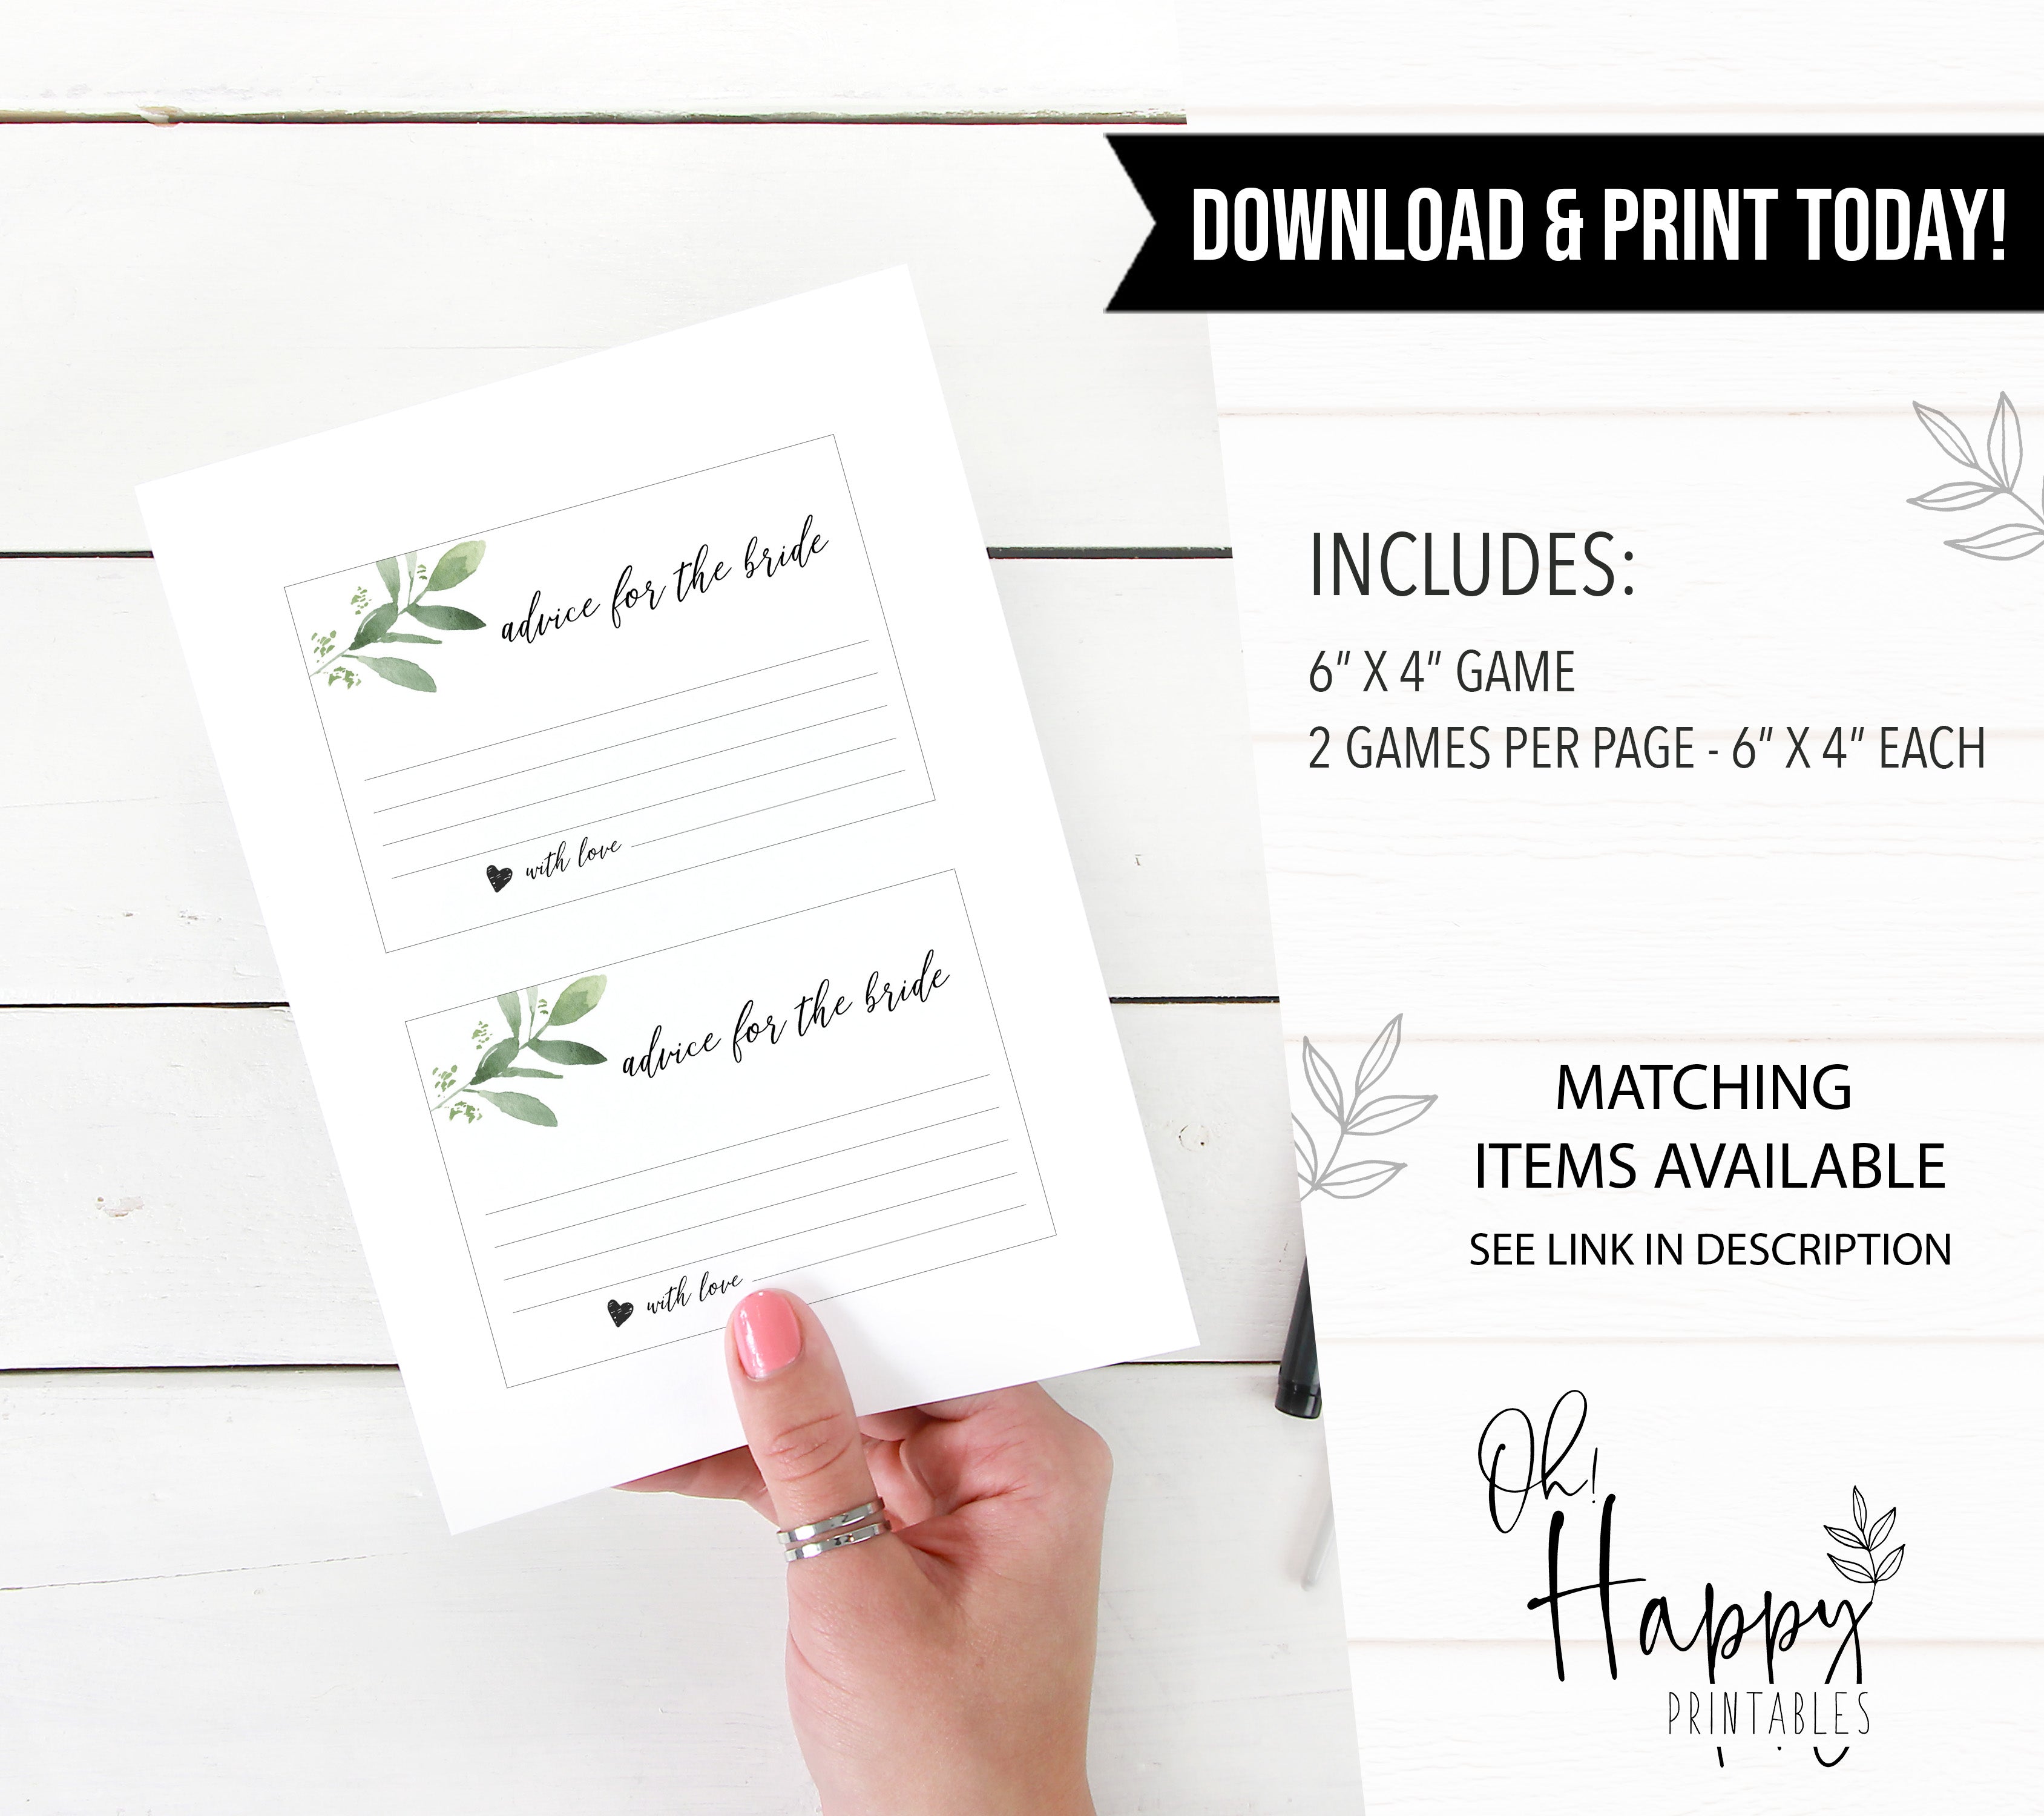 advice for the bride cards, greenery bridal shower, fun bridal shower games, bachelorette party games, floral bridal games, hen party ideas